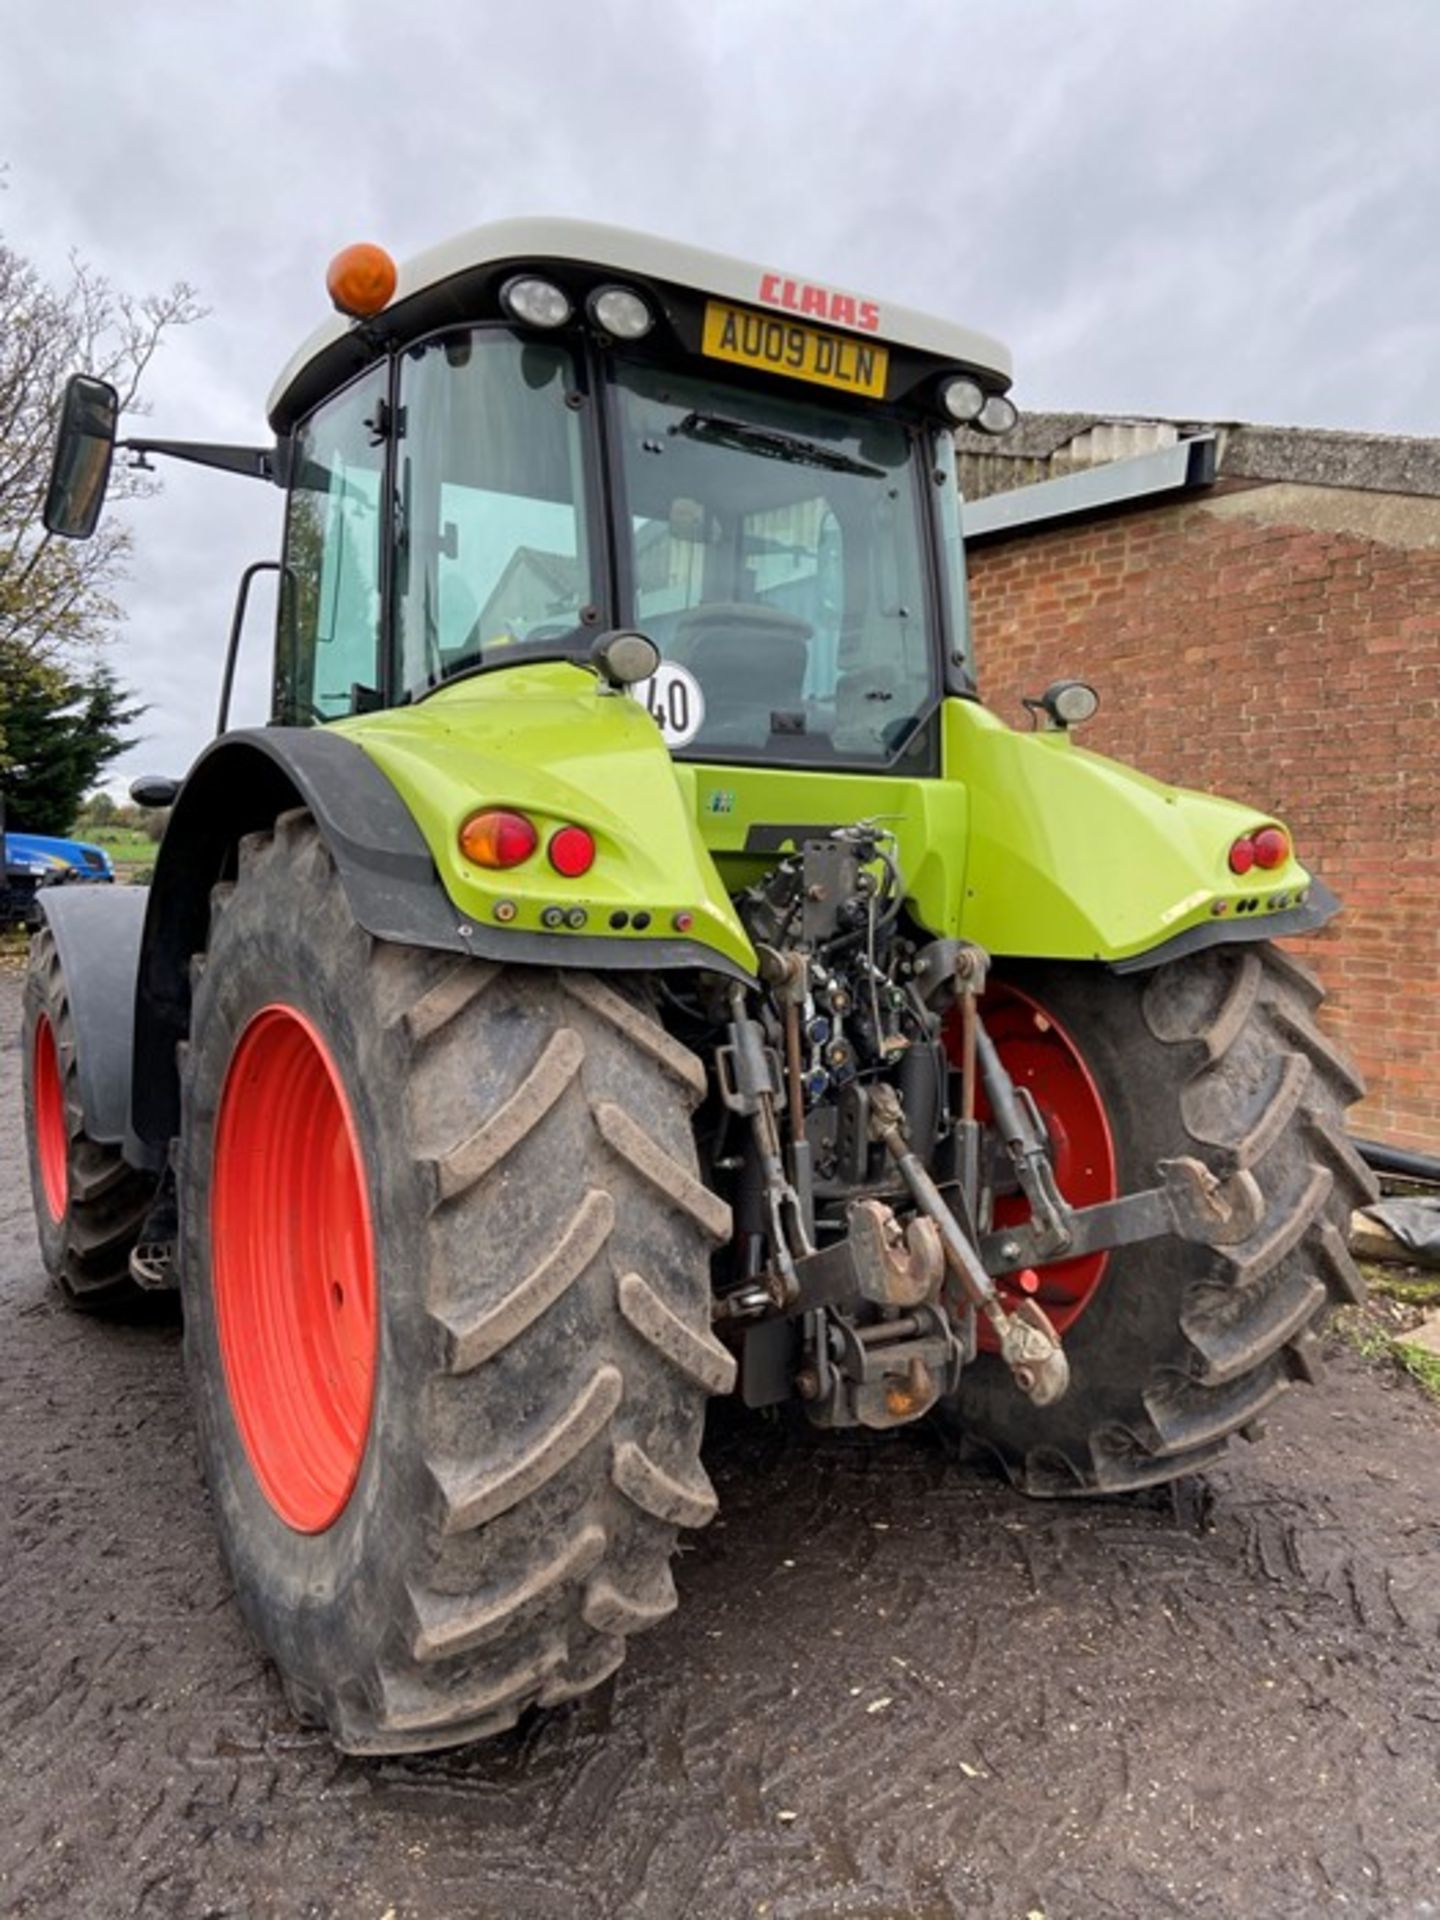 2009 Claas Arion 620 Tractor, 5571hrs, Reg Number AU09 DLN, serial number A1902356 - Image 2 of 5